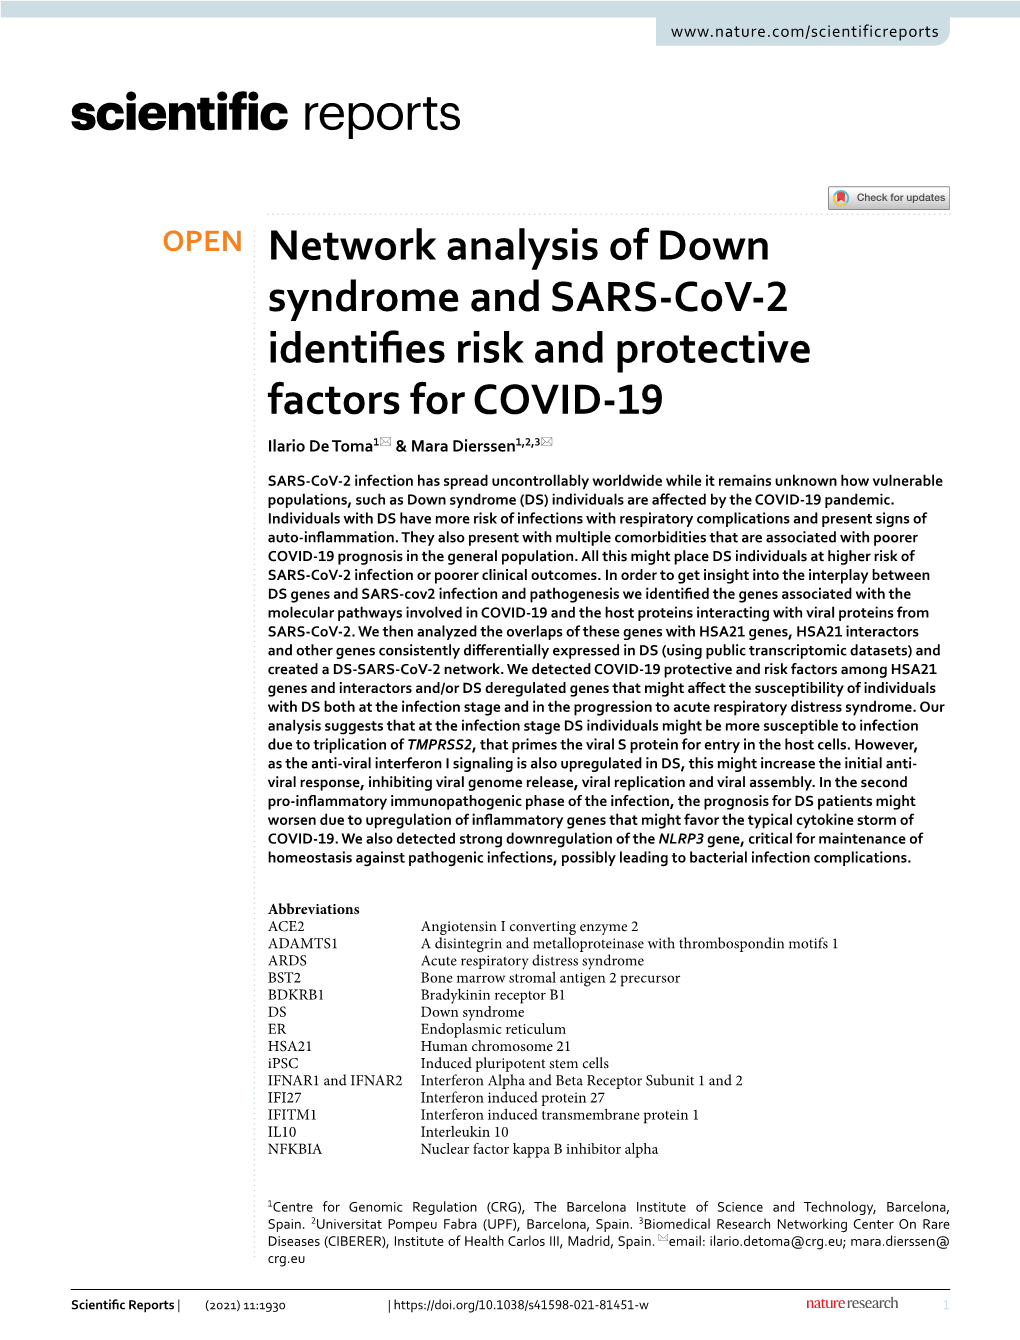 Network Analysis of Down Syndrome and SARS-Cov-2 Identifies Risk And